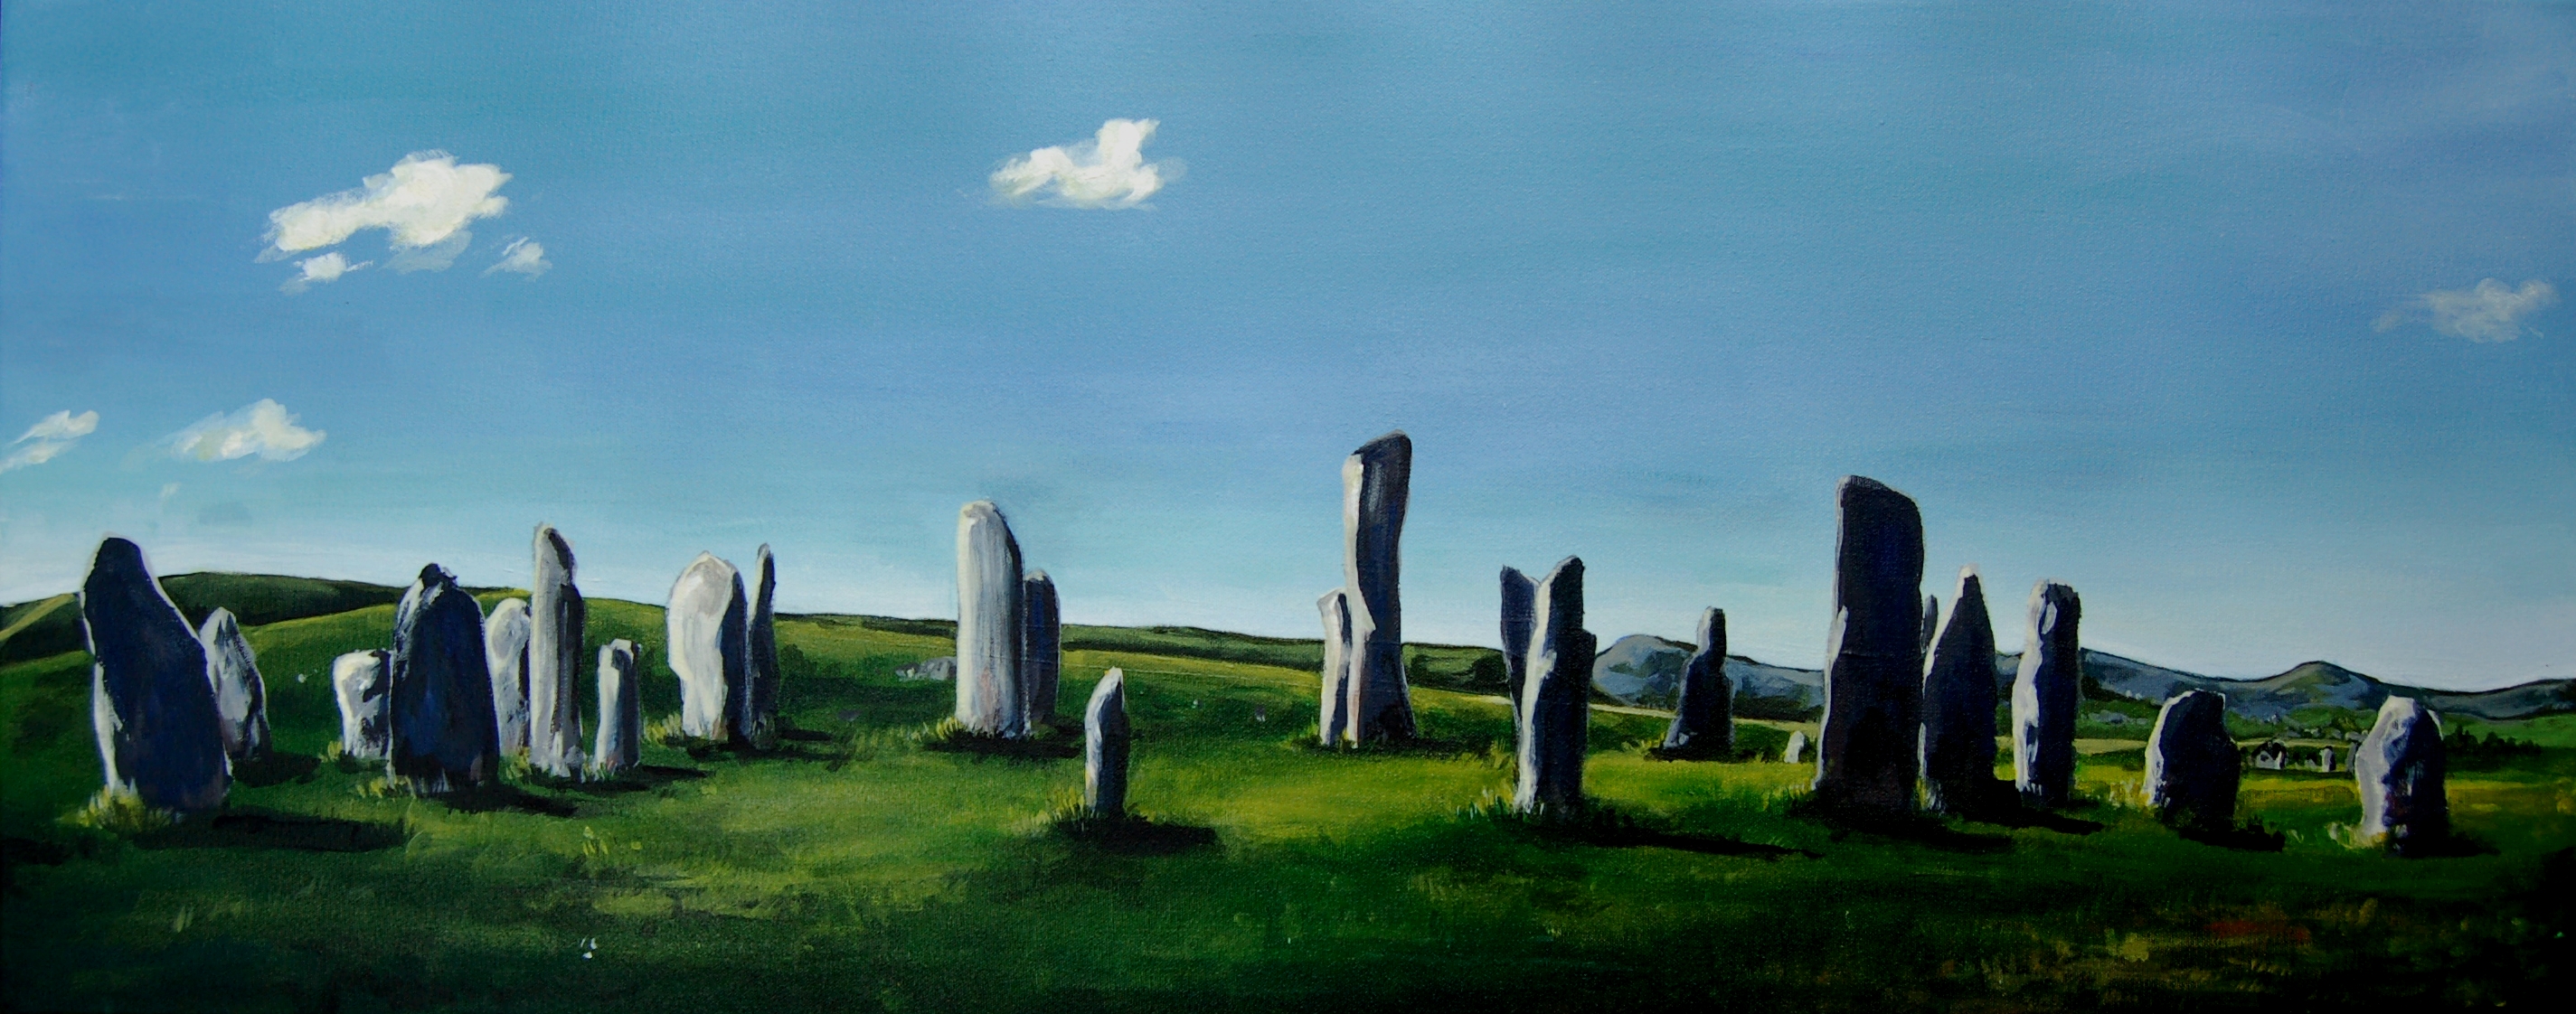 Callanish Stones<br>
Tom Webster<br>
Acrylic on Canvas